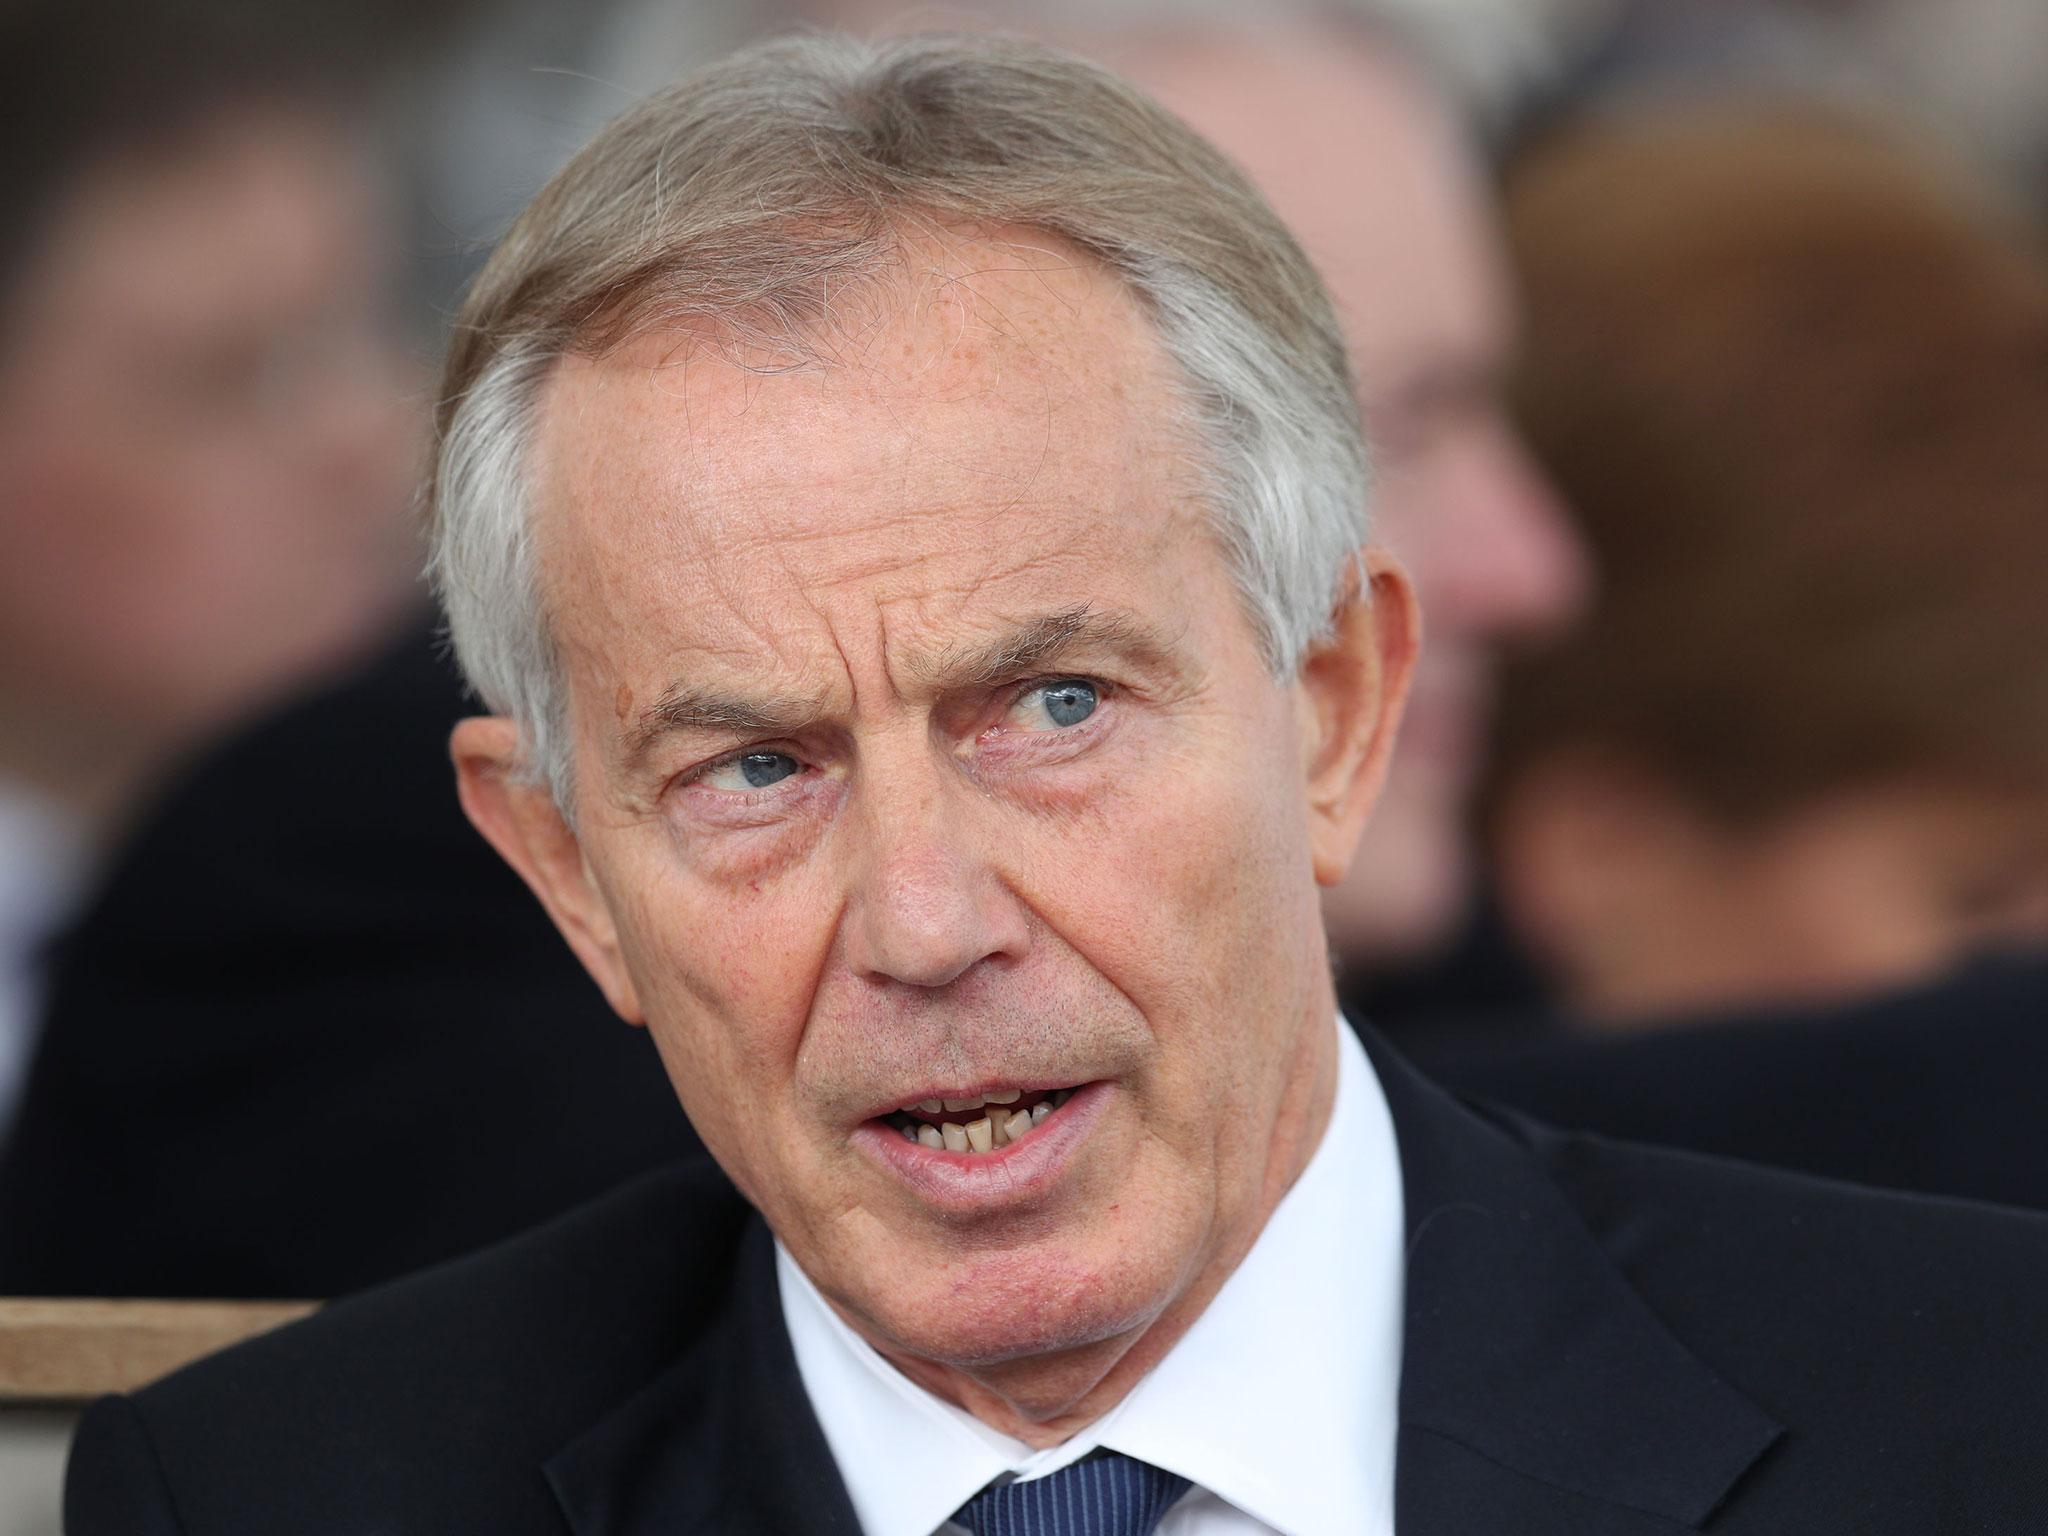 'The political situation is unprecedented and dangerous', Tony Blair said